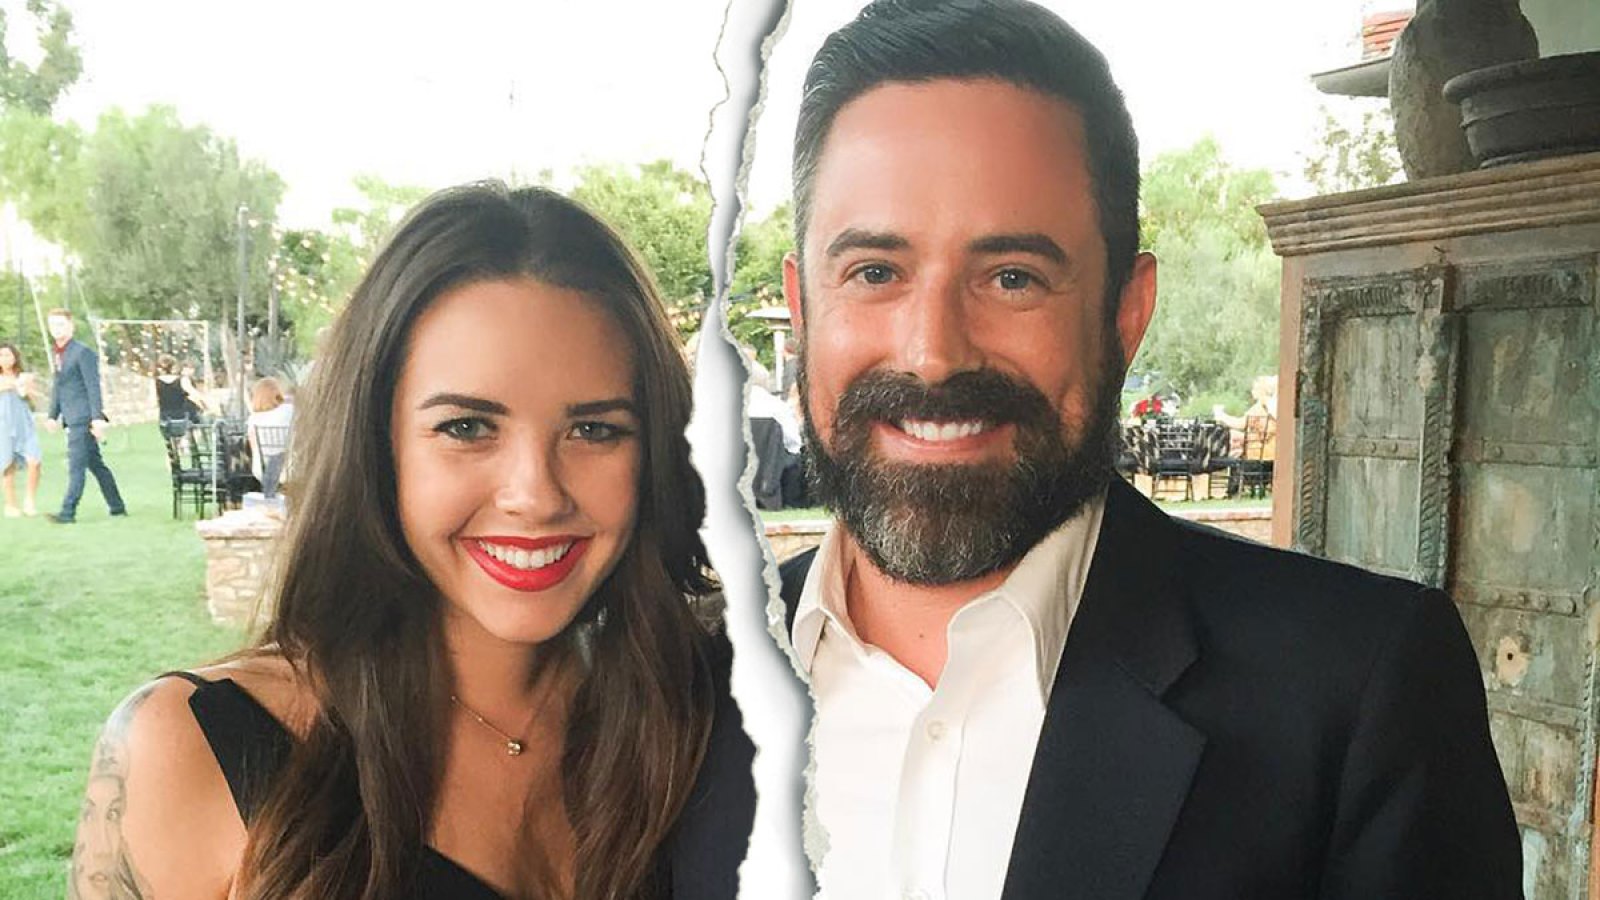 Alexis Neiers Files for Divorce From Husband Evan Haines After Revealing Open Marriage